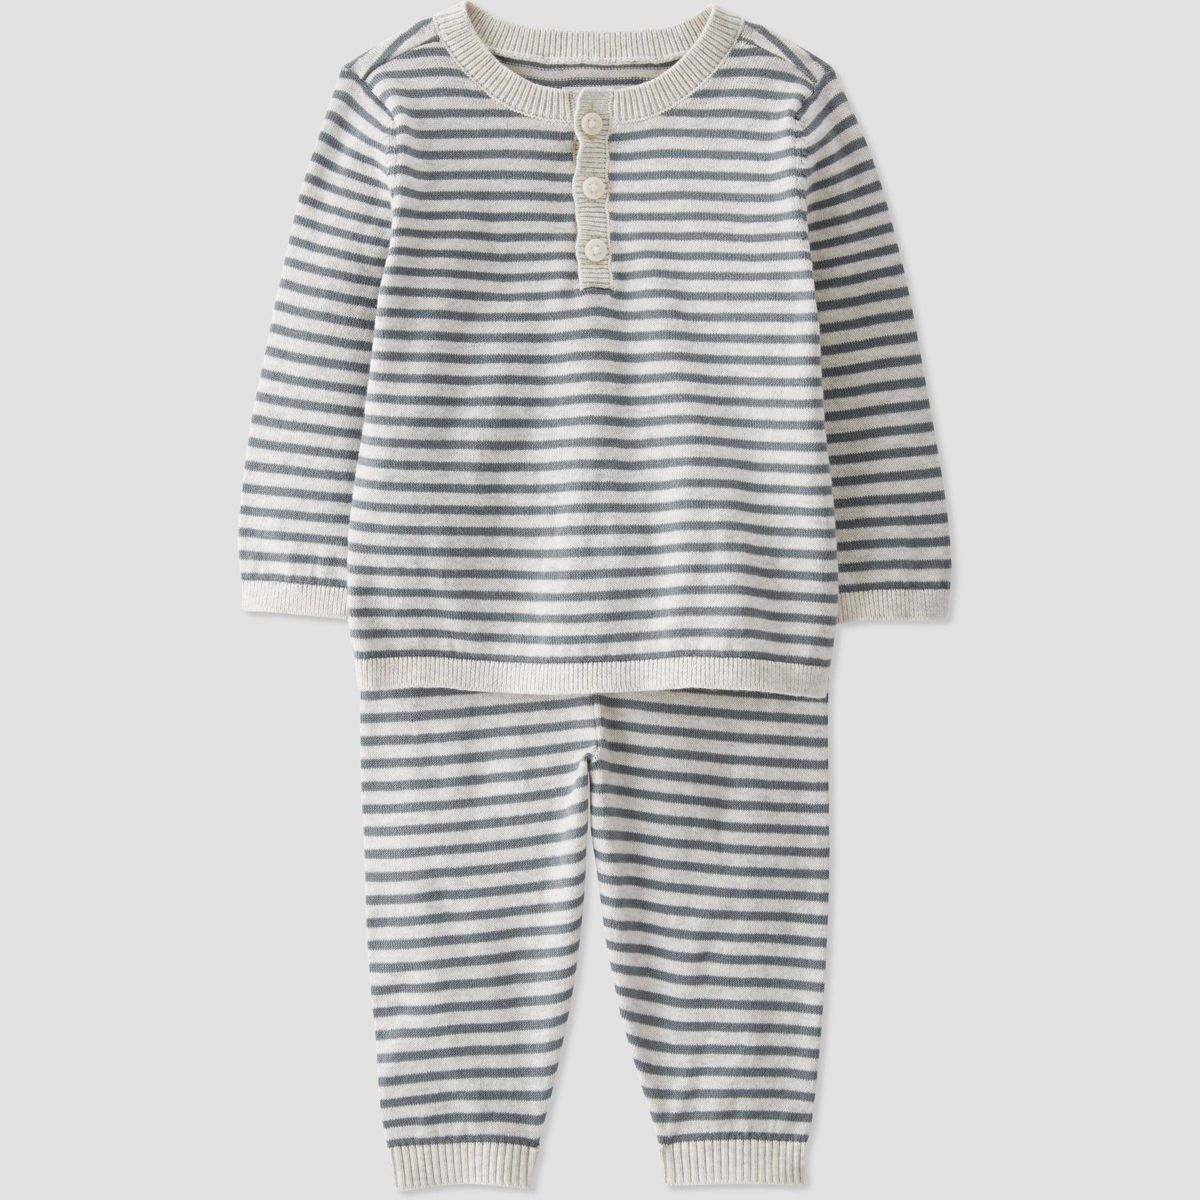 Little Planet by Carter’s Baby 2pc Striped Top and Bottom Set - Heather Gray | Target